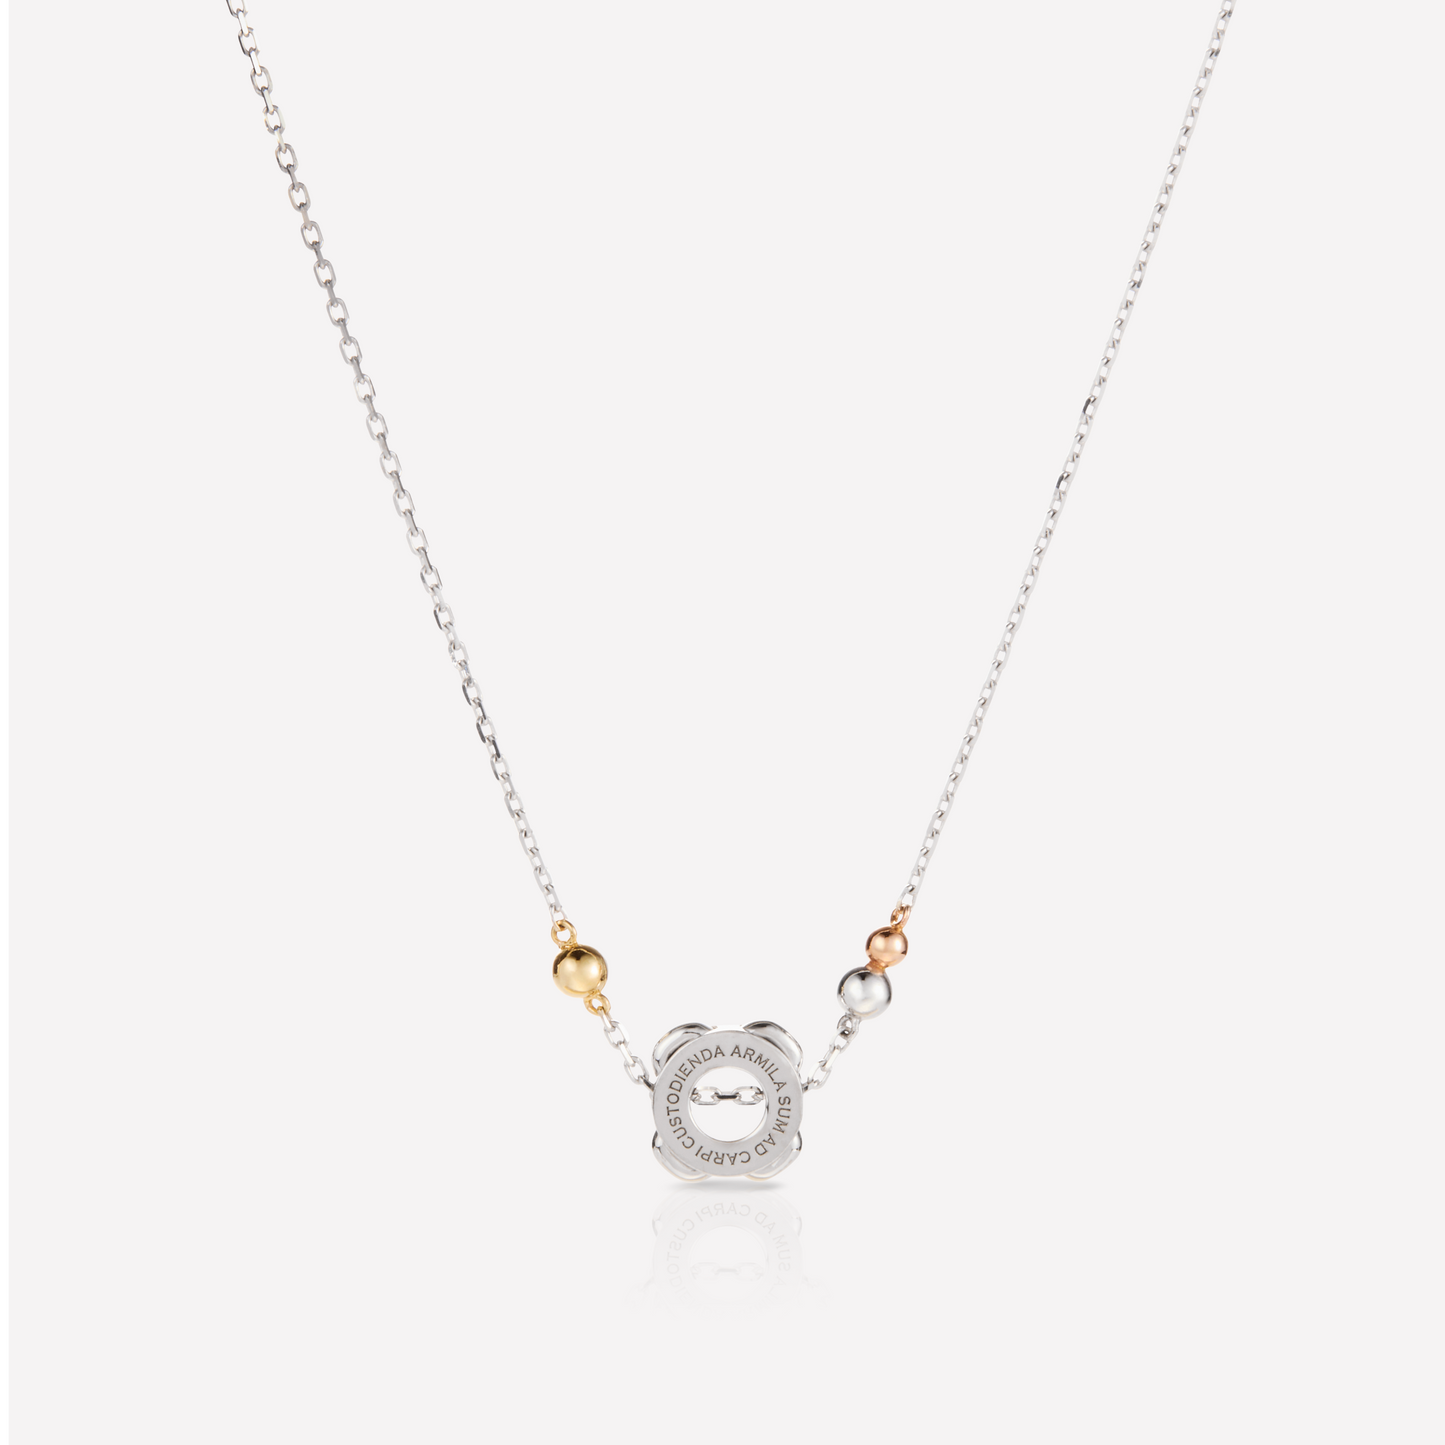 Twined 2,5 Collier, Gouttelttes